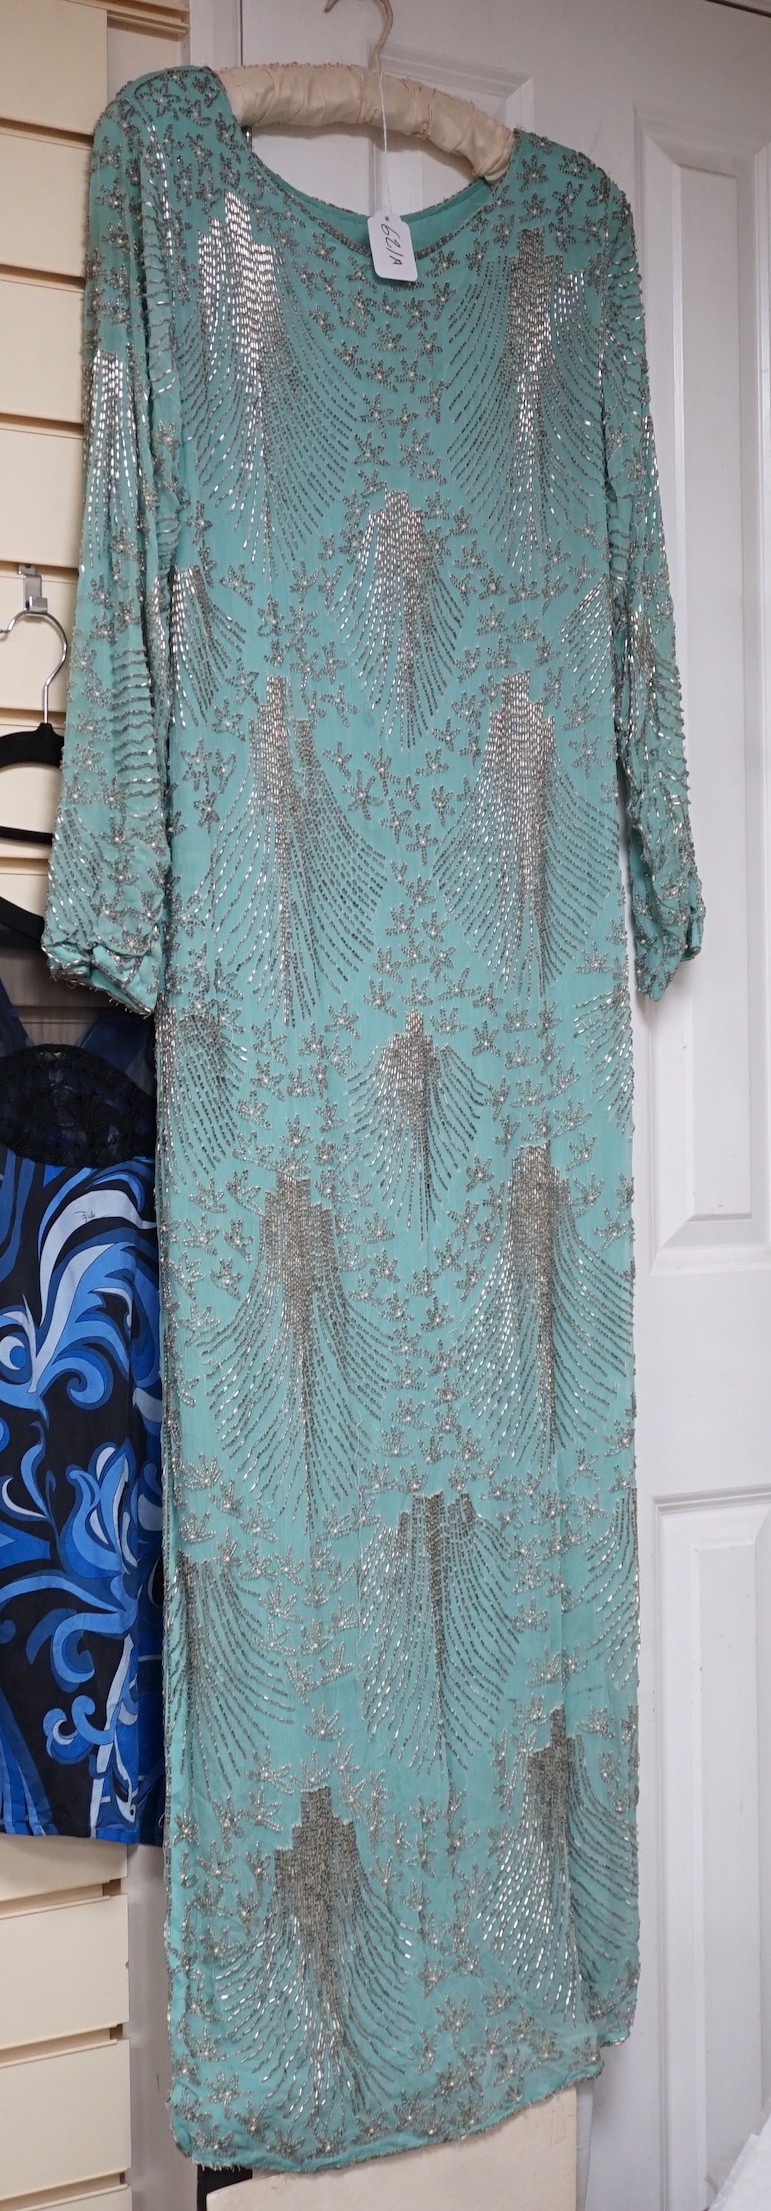 A 1940's turquoise chiffon evening dress and peacock designed shawl owned by Princess Sevilla Hercolani